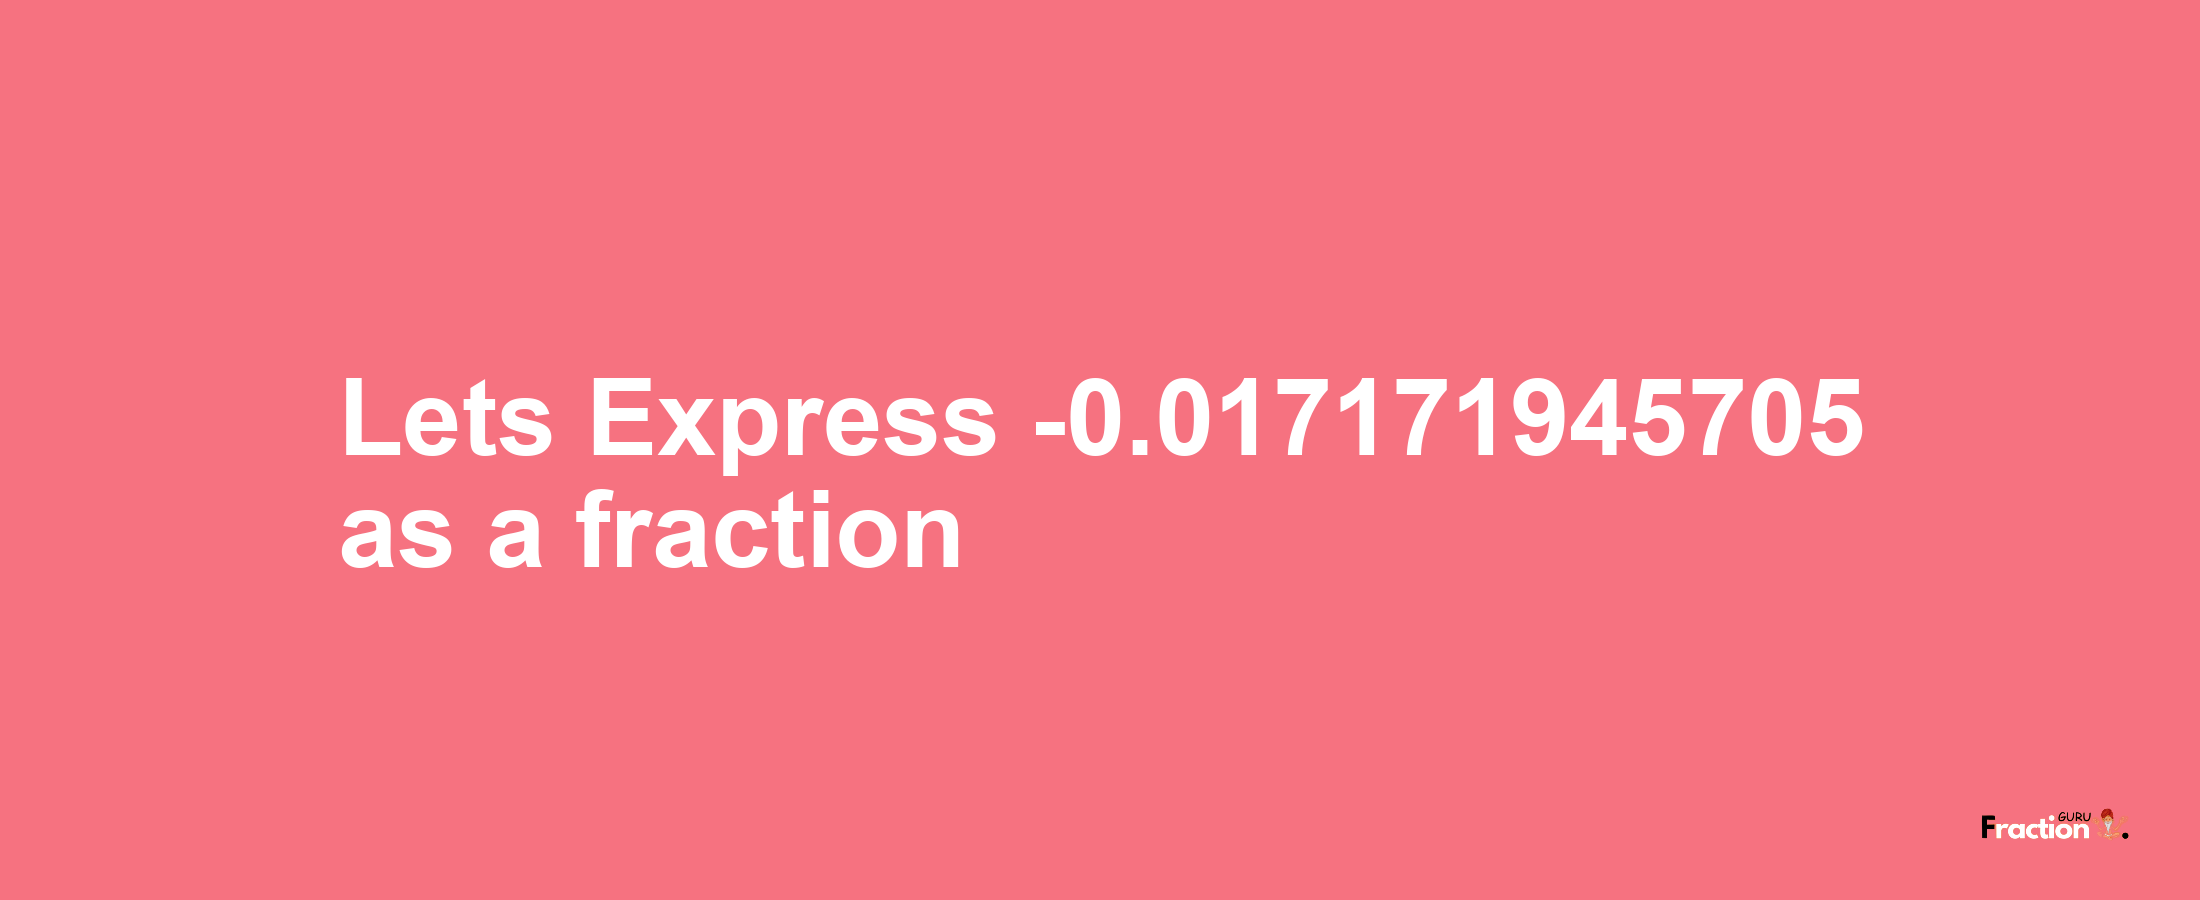 Lets Express -0.017171945705 as afraction